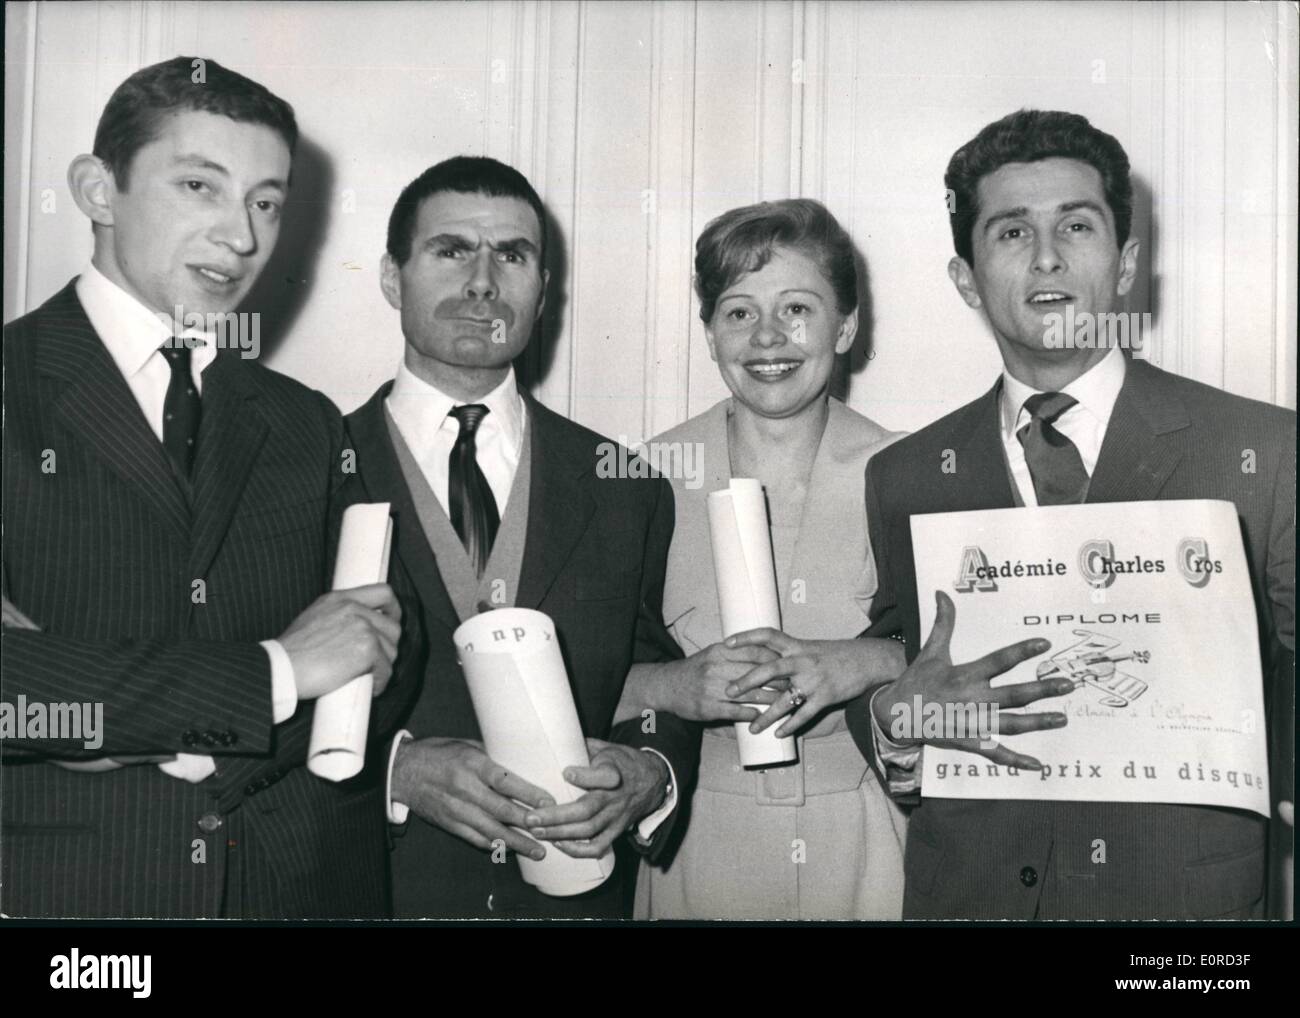 Mar. 03, 1959 - Best Recordings Rewarded: Prizes For The Best Recordings Were Awarded To Four Young Singers By The Academy Charles Cros At Palais D'Orsay, Paris, Yesterday. The Occasion Was The International Congress Of ''High Fidelity And Stereophony'' Now Being Held In Paris. Photo shows The Four Prize Winners. From Left To Right: Jacques Dufilho, Serge Gainsbourg, Denise Benoit And Maricel Amont. Stock Photo